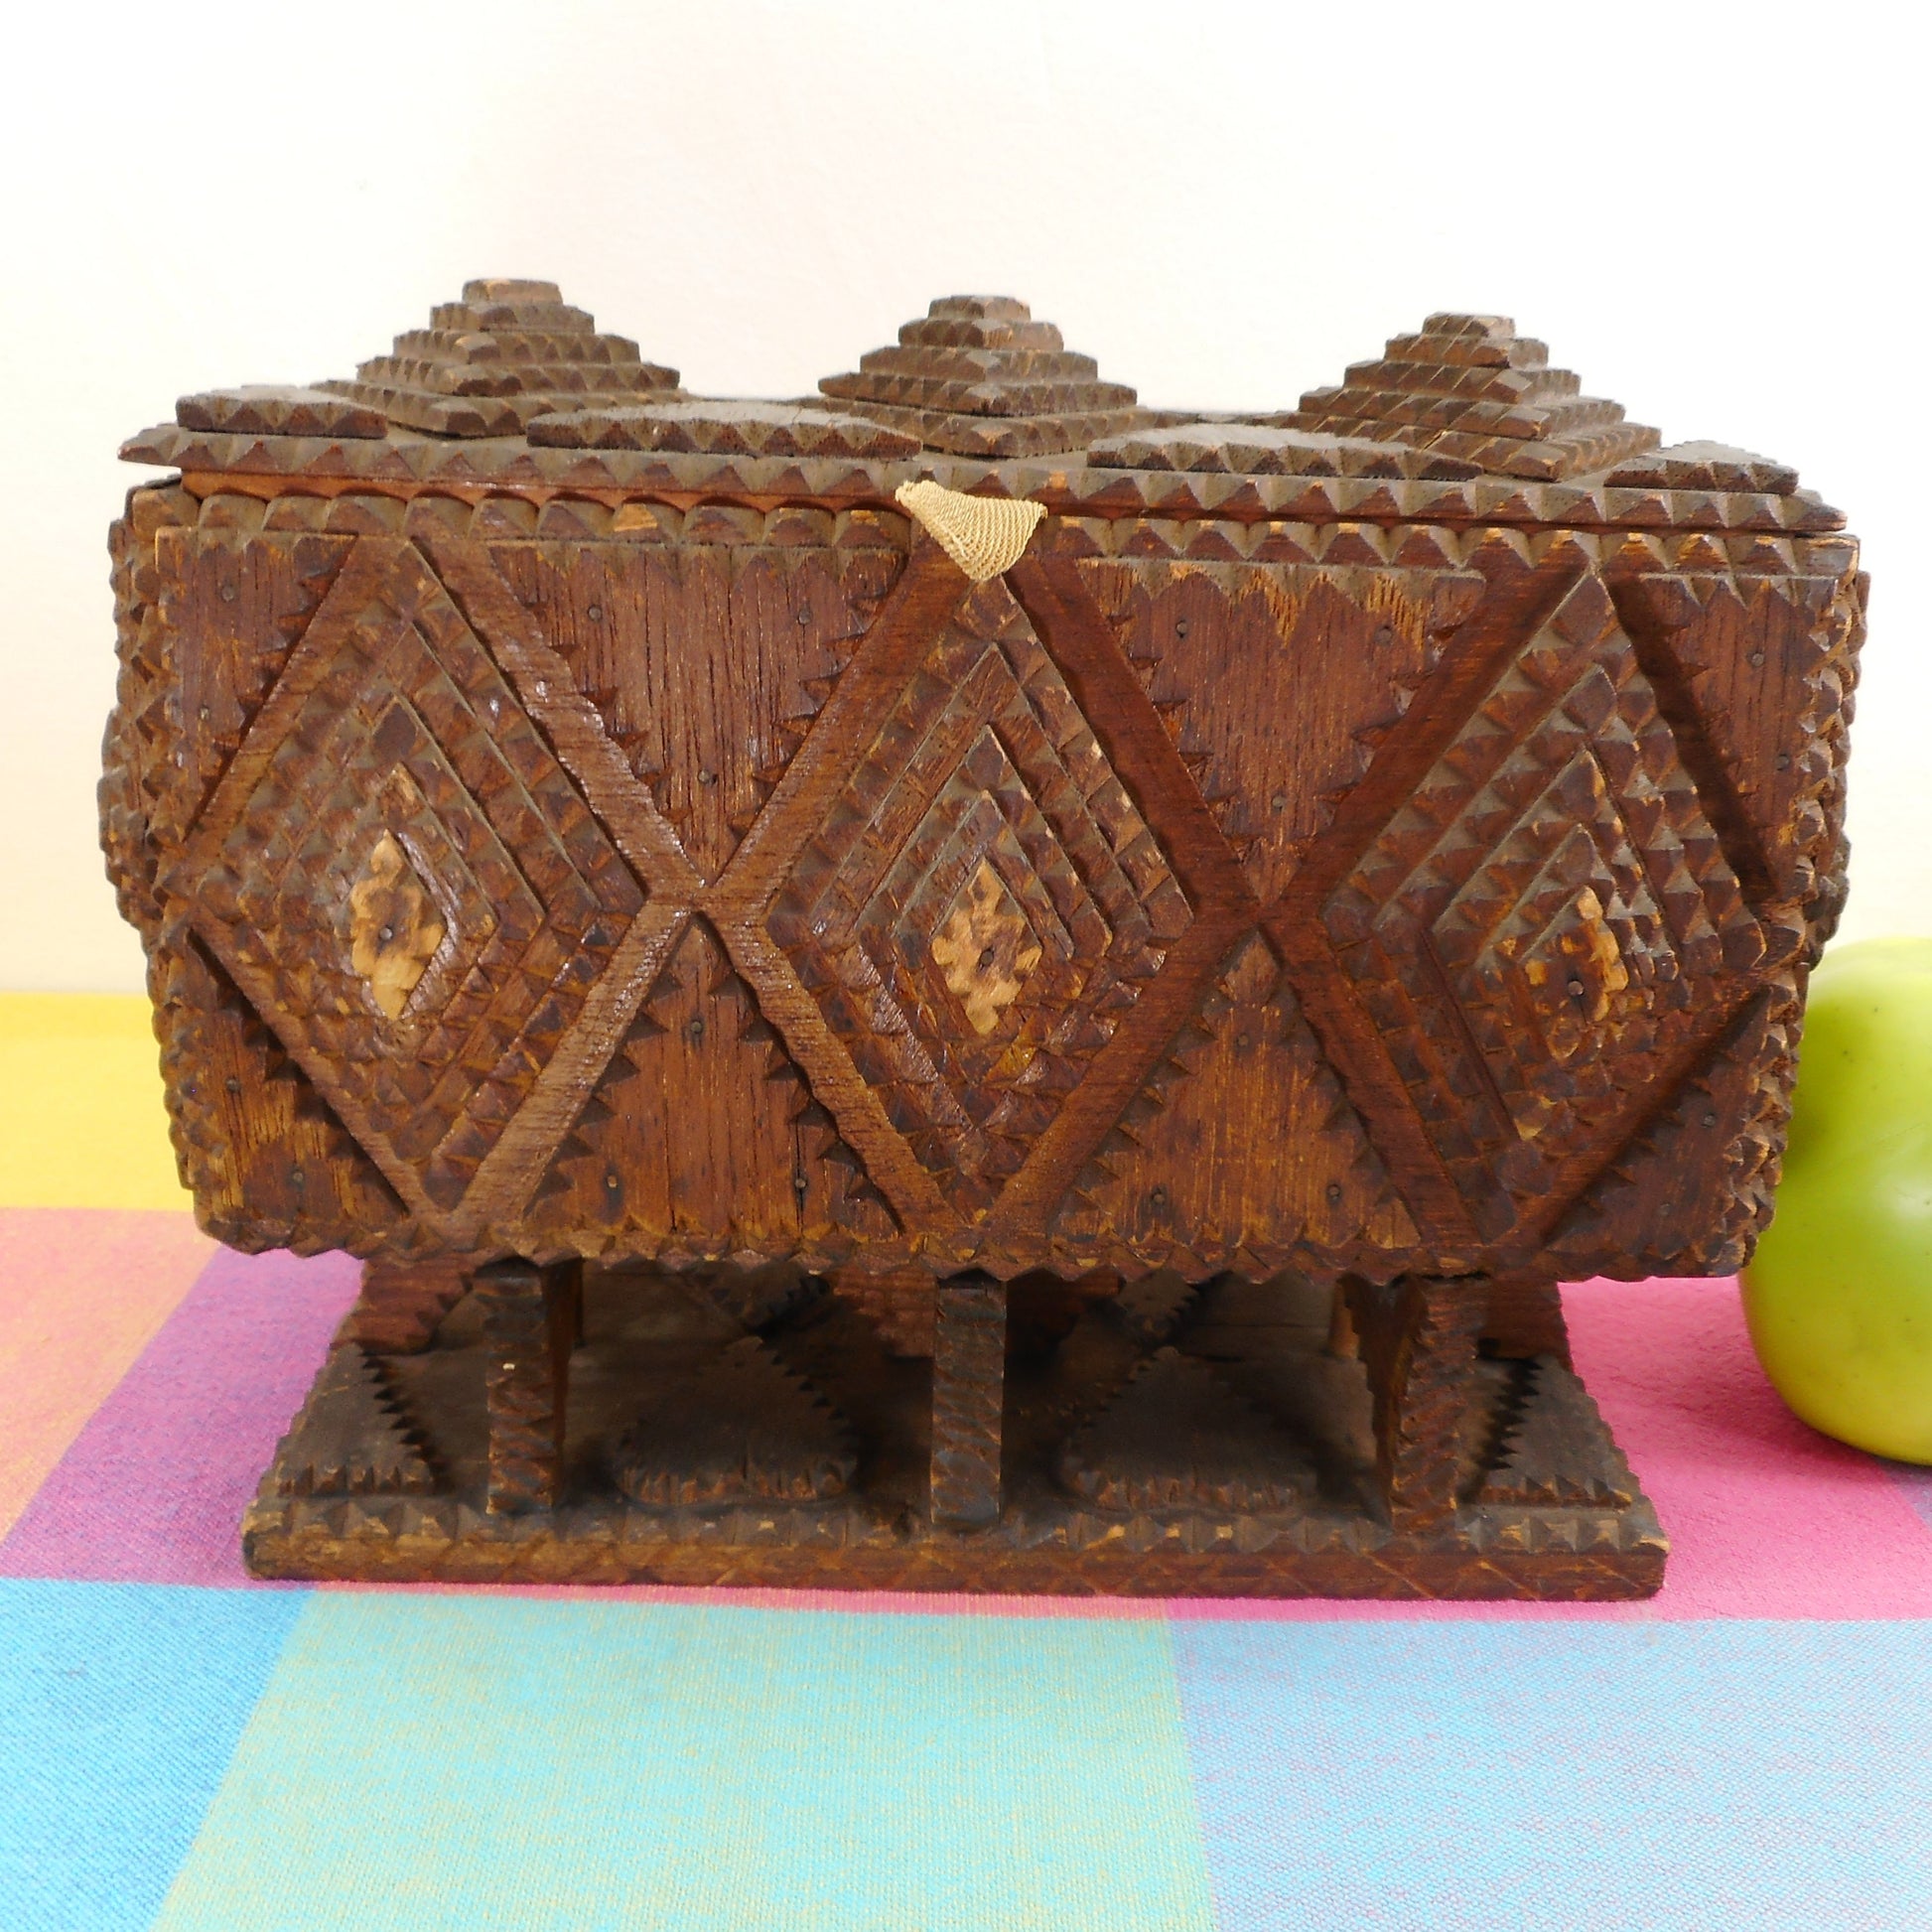 Antique Tramp Folk Art Carved From Cigar Box Footed Chest - 5 Cent Havana Cheroots Ladies